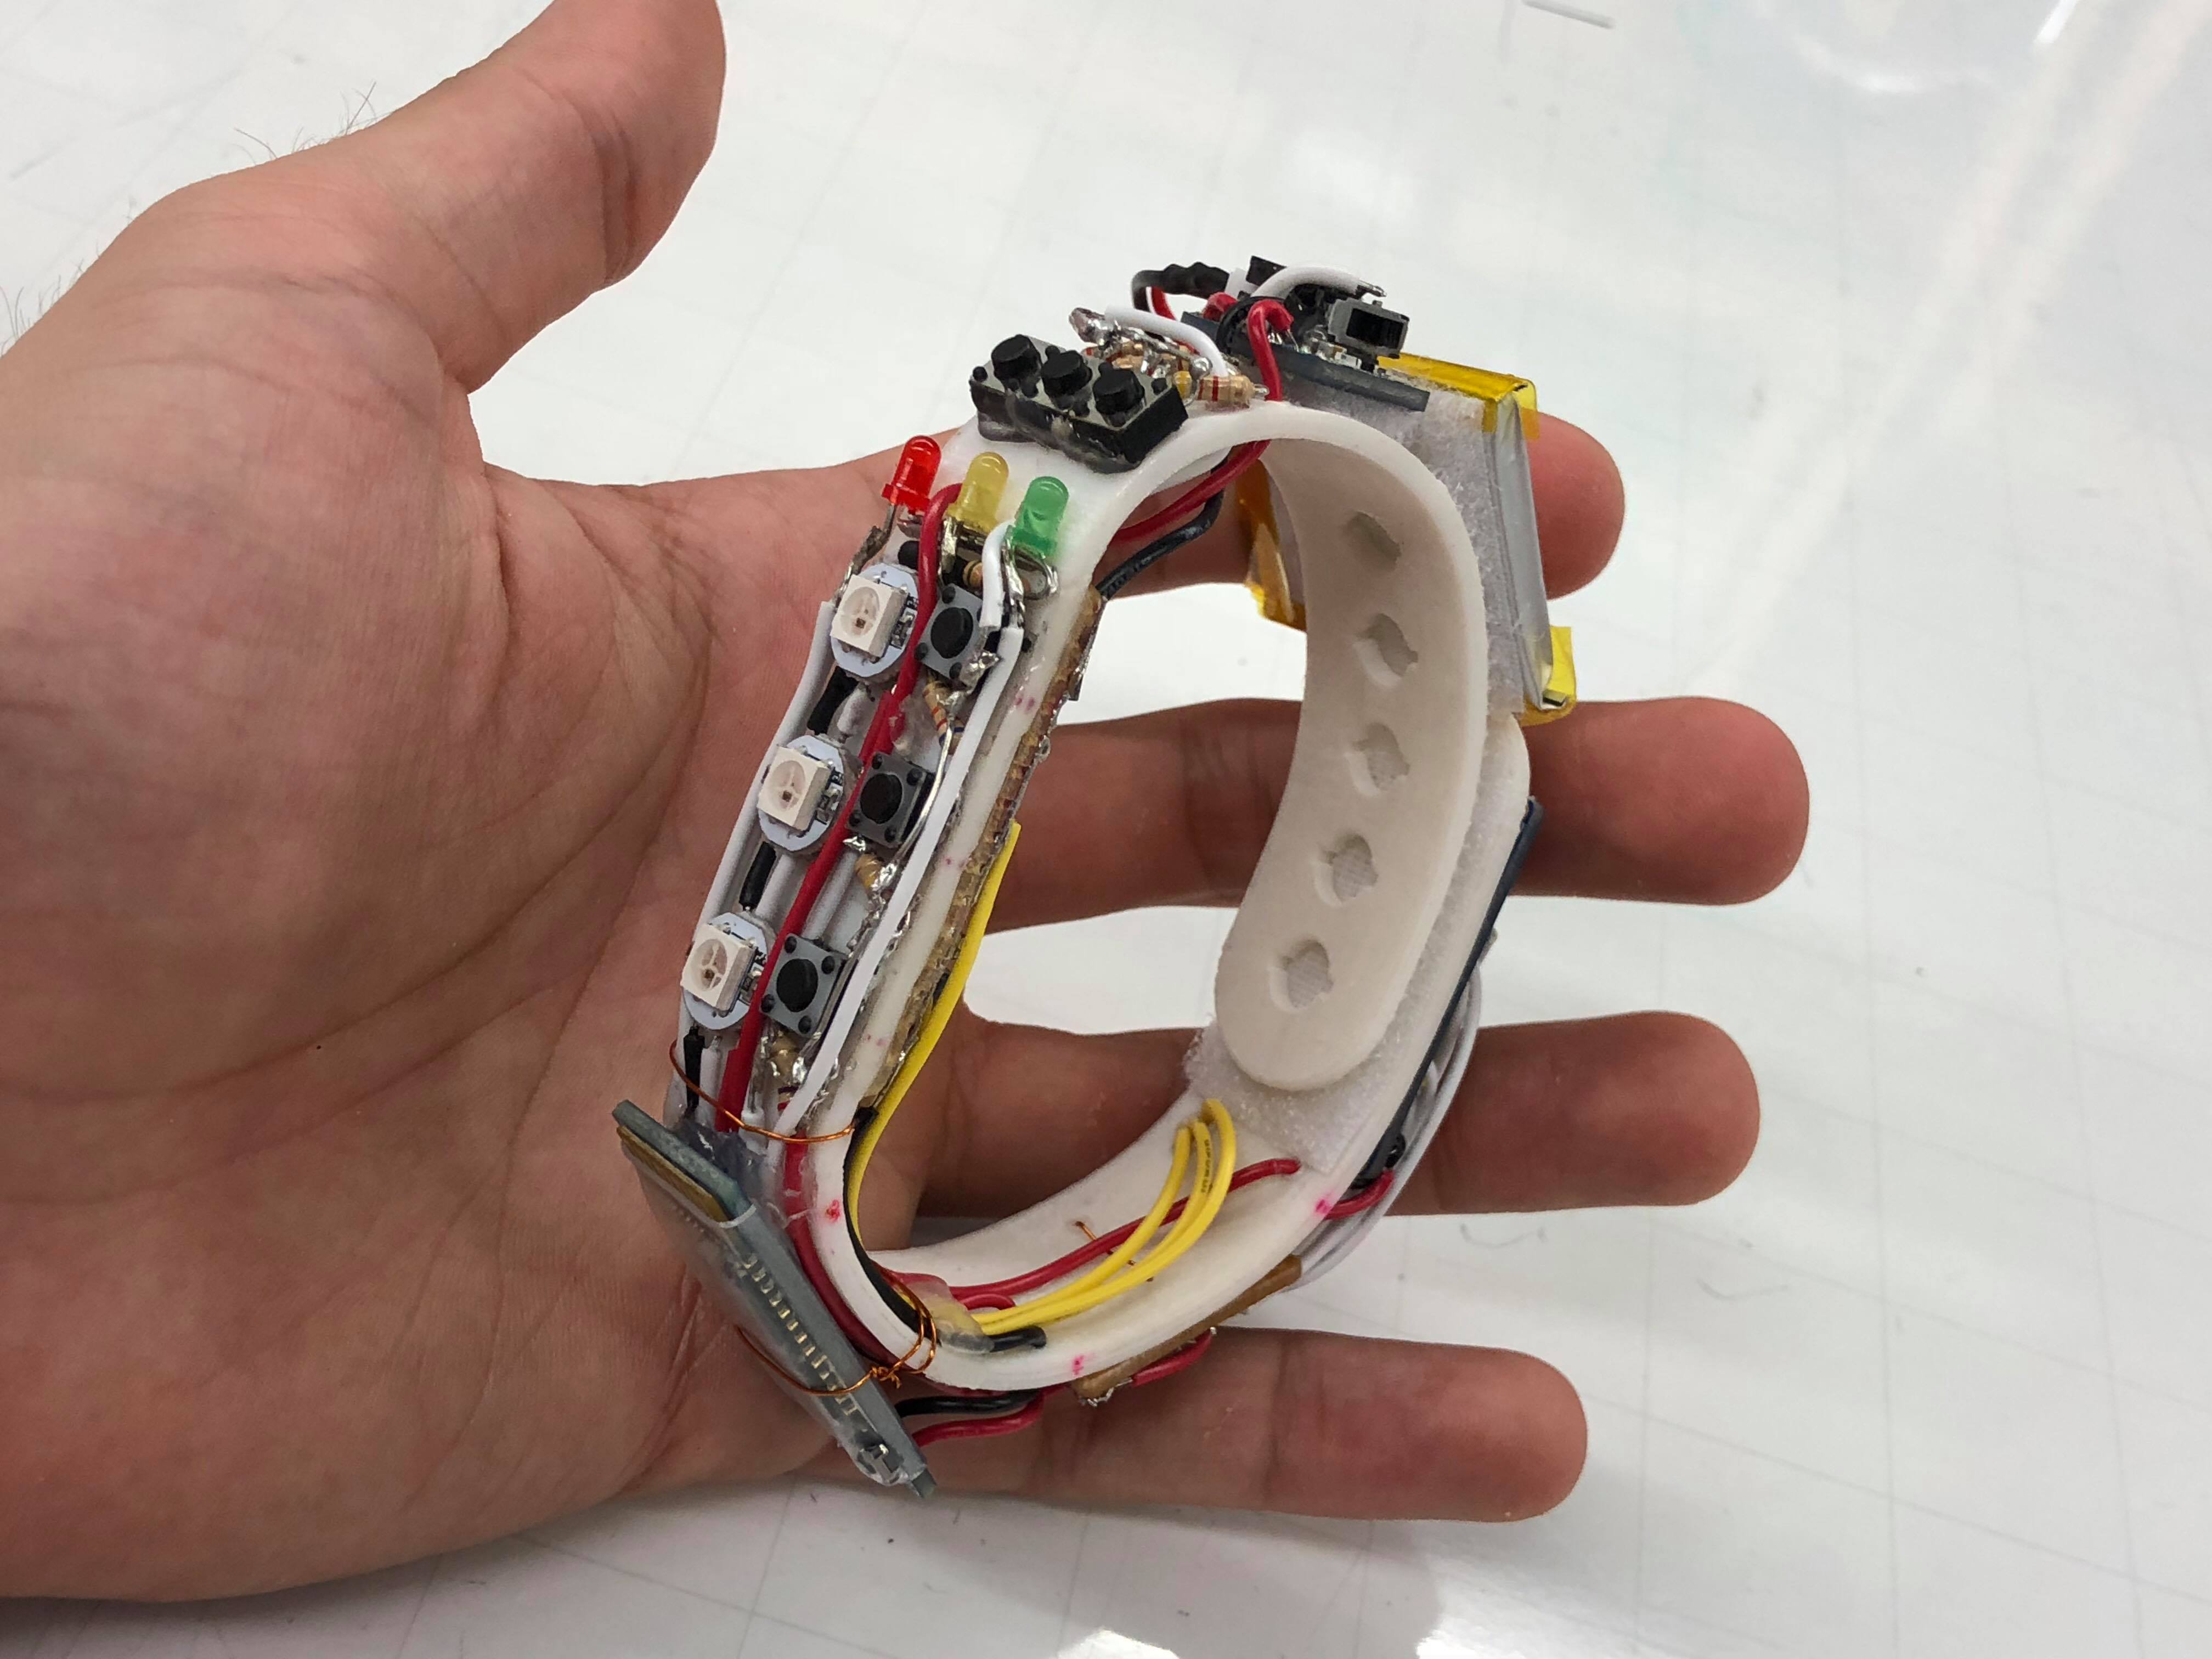 Photo depicts a prototype of an electronic wrist band in the hand of a Siempre team member. There are exposed wires, buttons, lights and other components. The band is white, curved and appears to be 3D-printed.